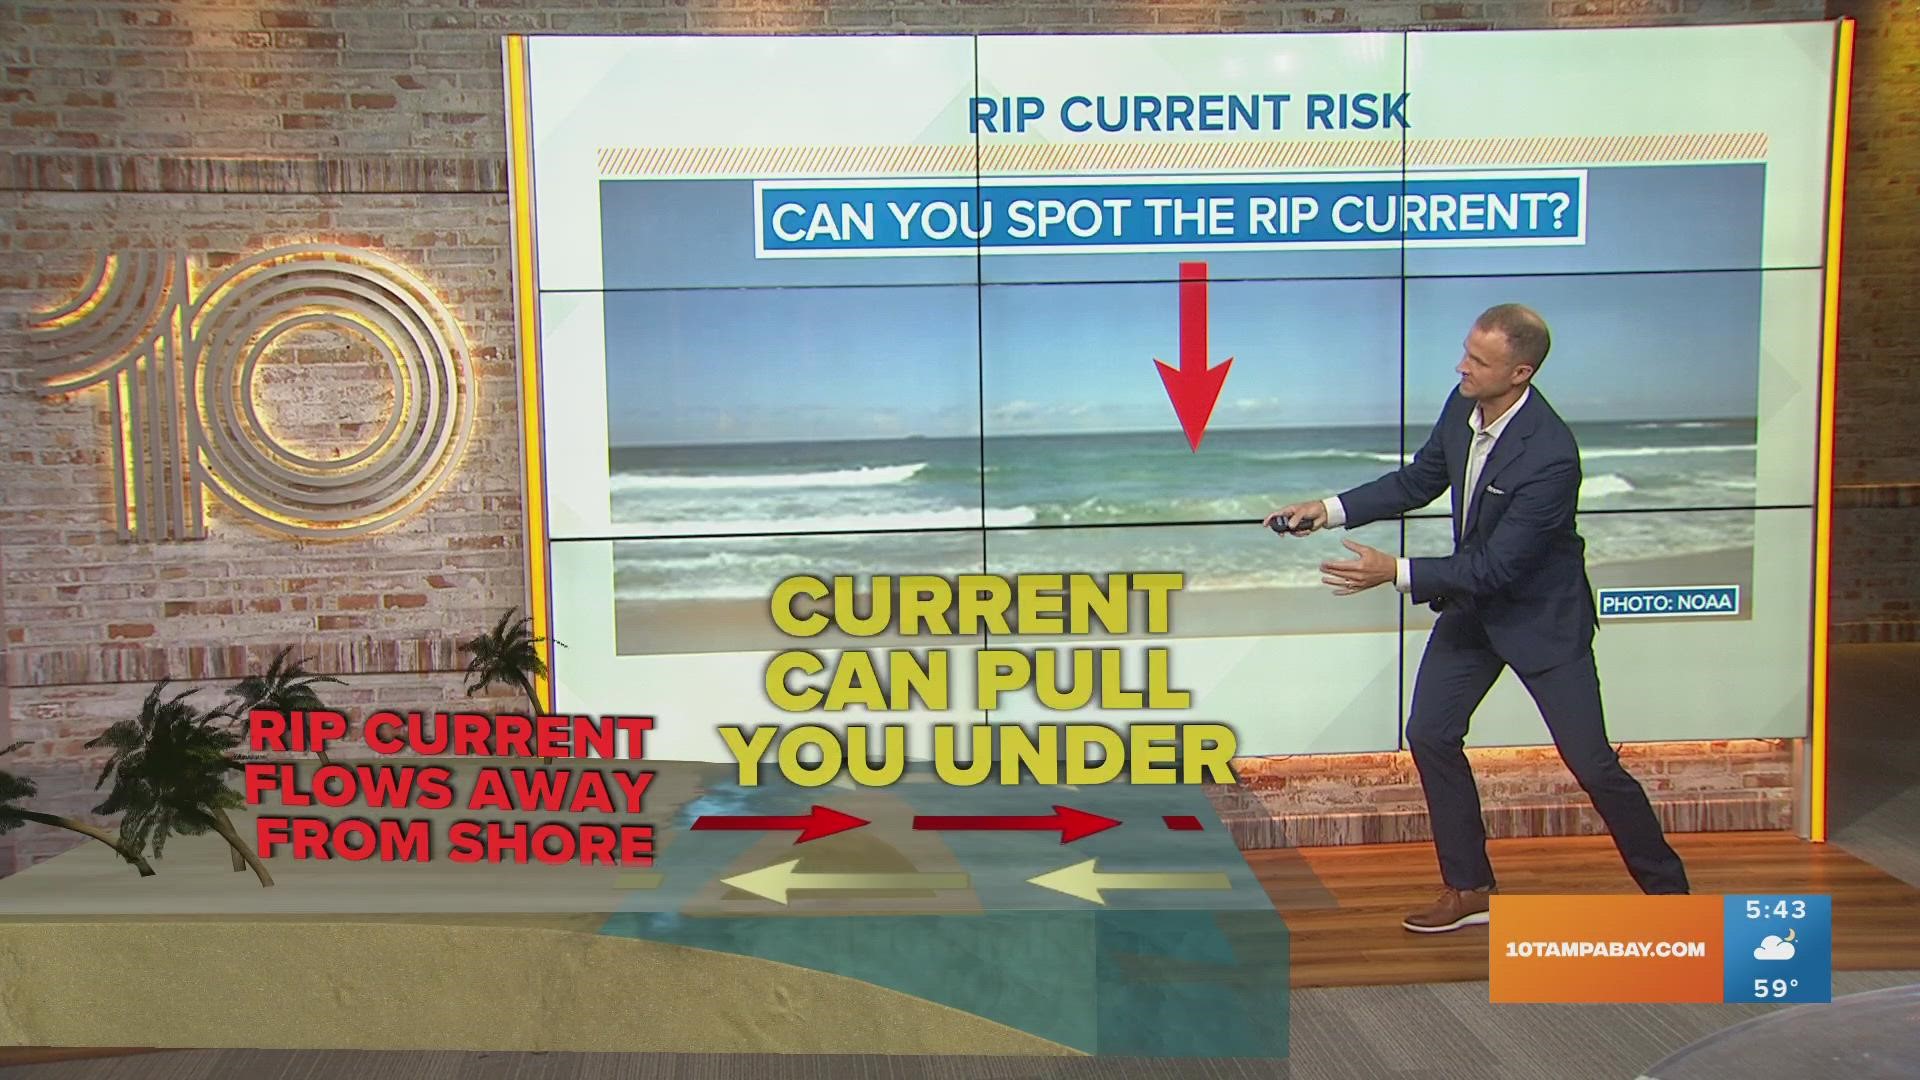 Rip currents happen when strong winds push waves up against the coast and cause a current to flow away from the shore.